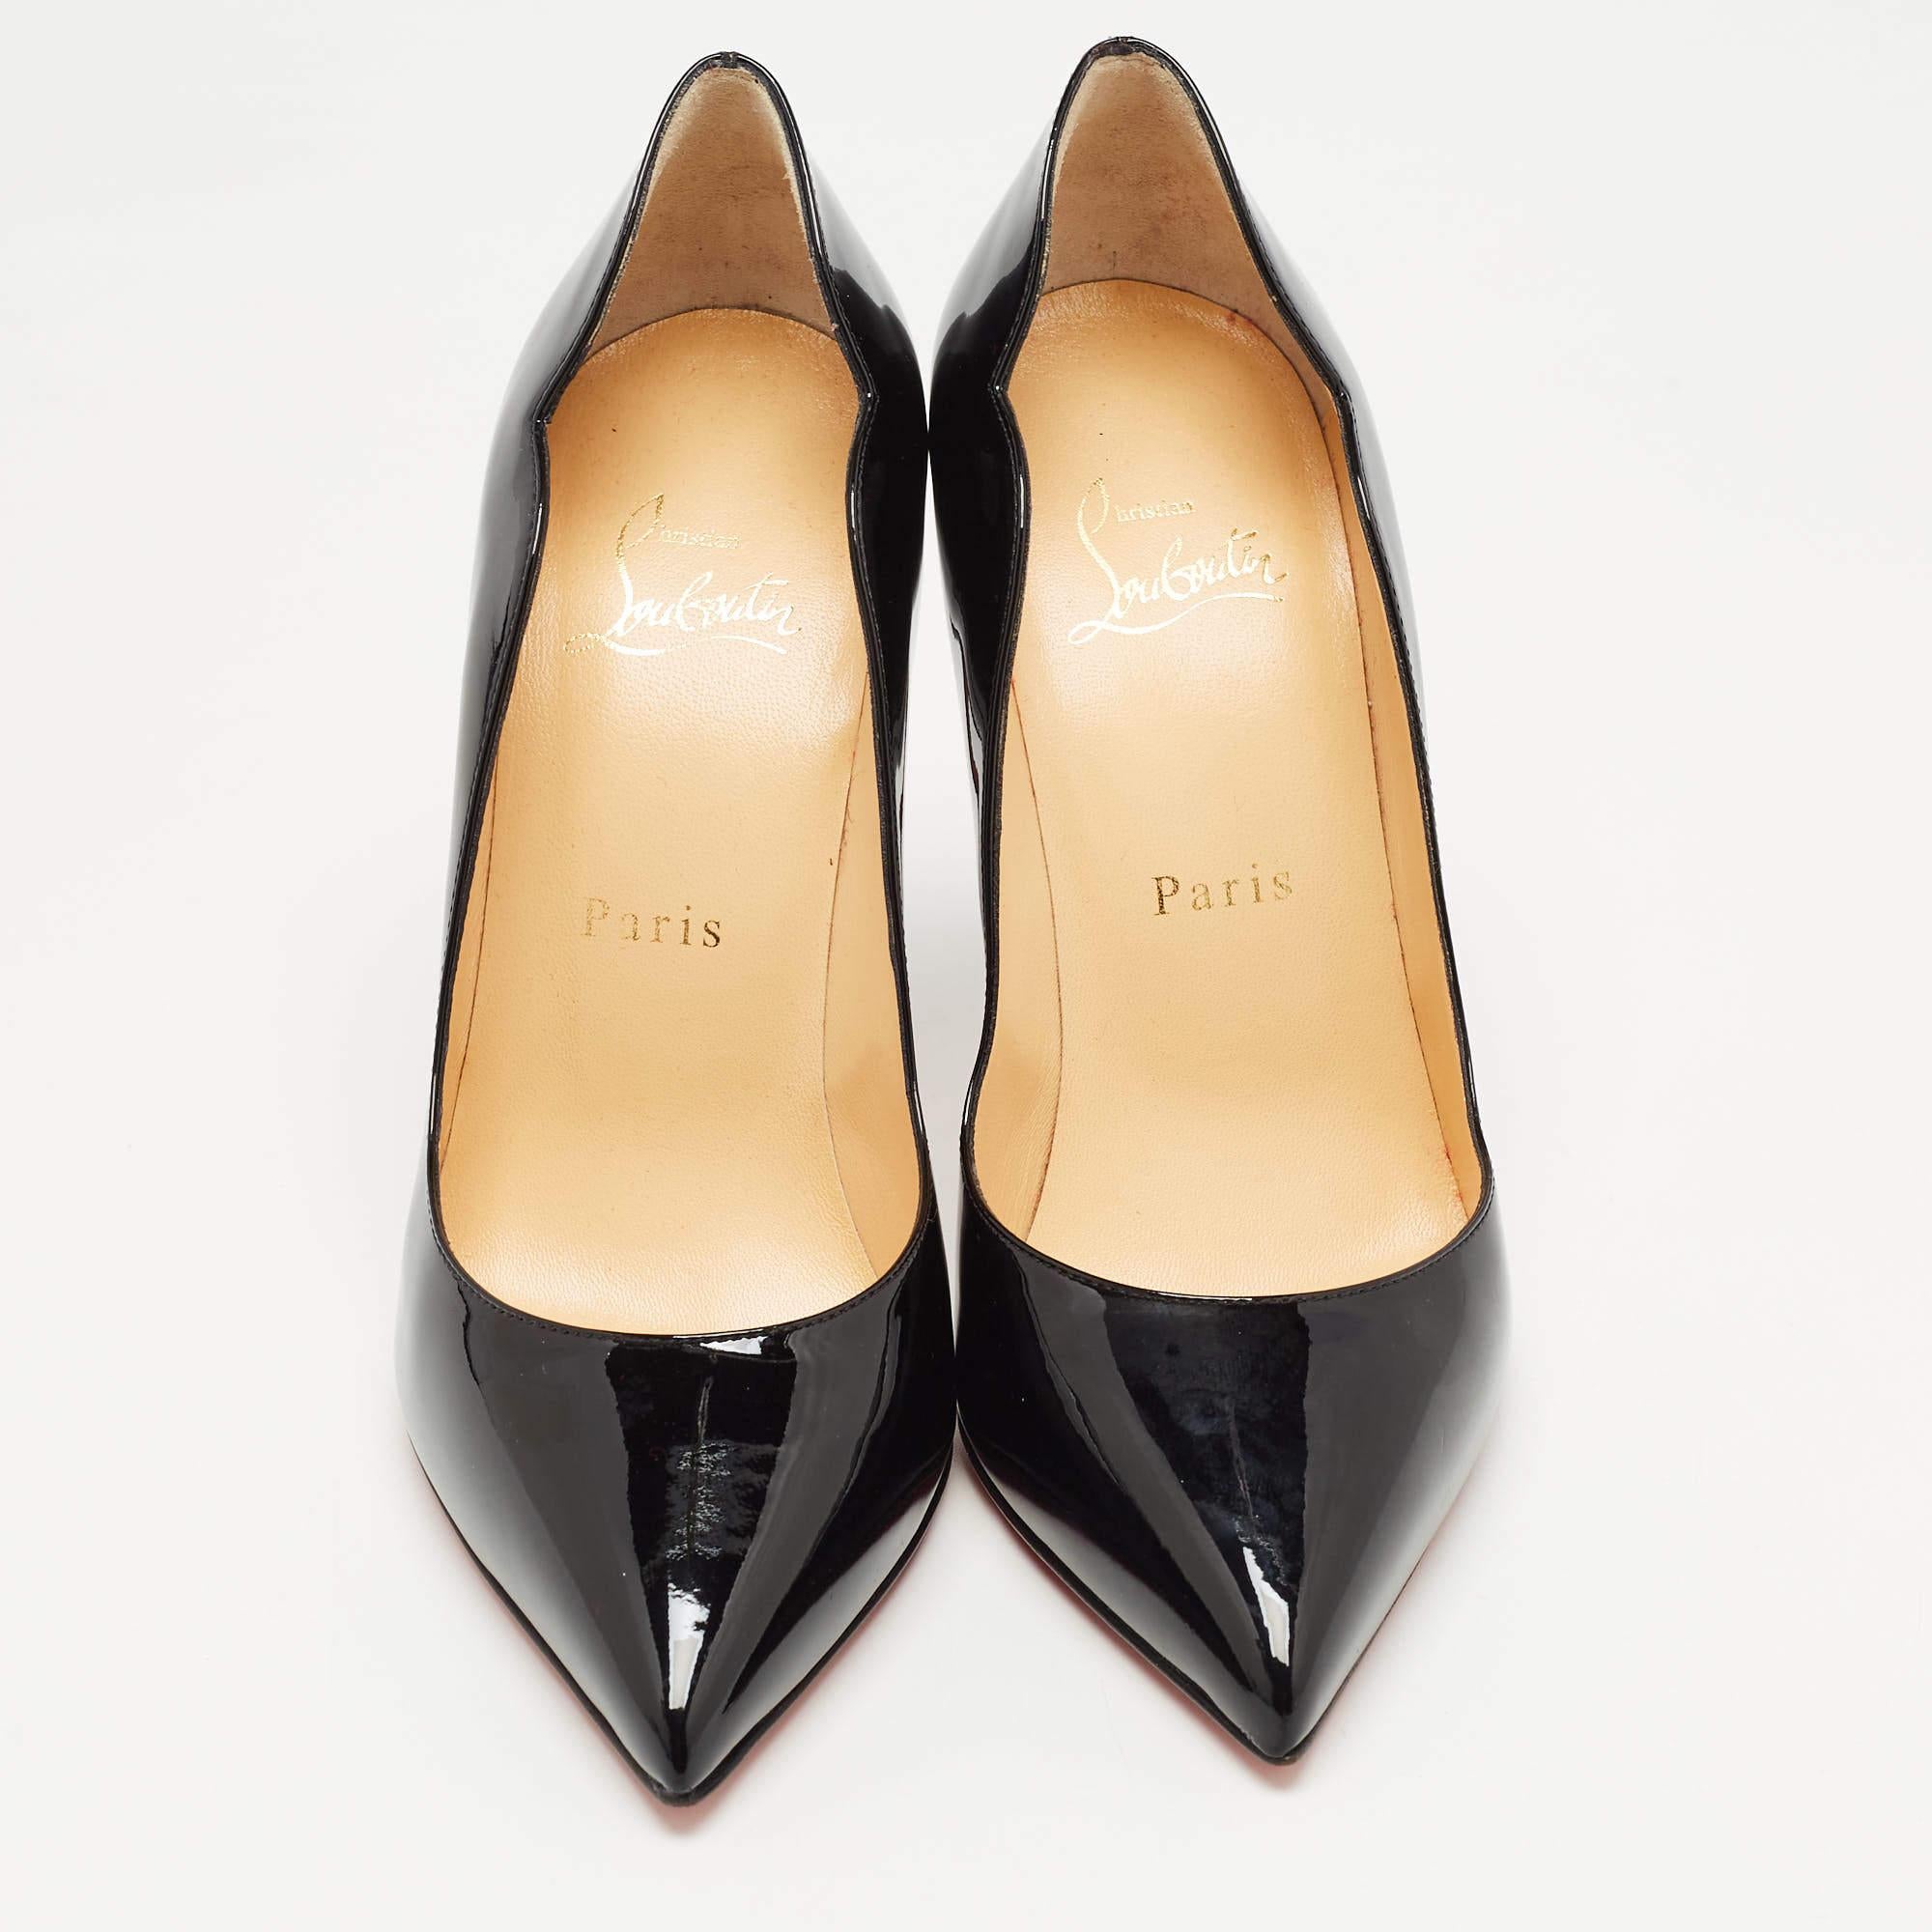 These Hot Chick pumps from Christian Louboutin are meant to be a loved choice. Wonderfully crafted and balanced on sleek heels, the pumps will lift your feet in a stunning silhouette.

Includes: Original Dustbag

